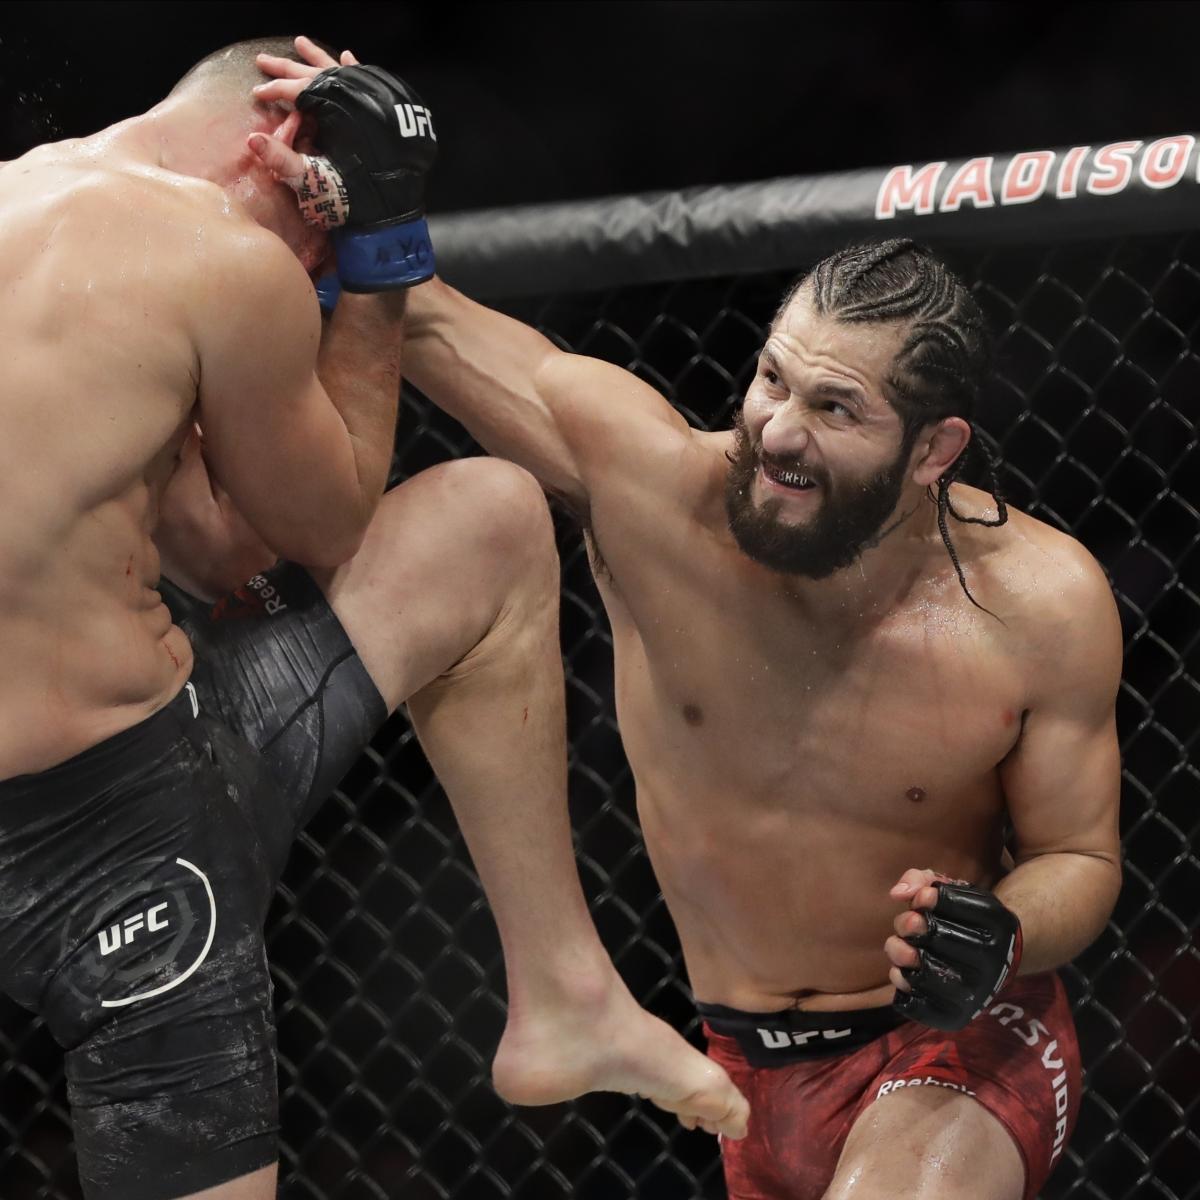 Jorge Masvidal Slams UFC’s Contract Building: ‘This Is the Wrestle of Our Lives’